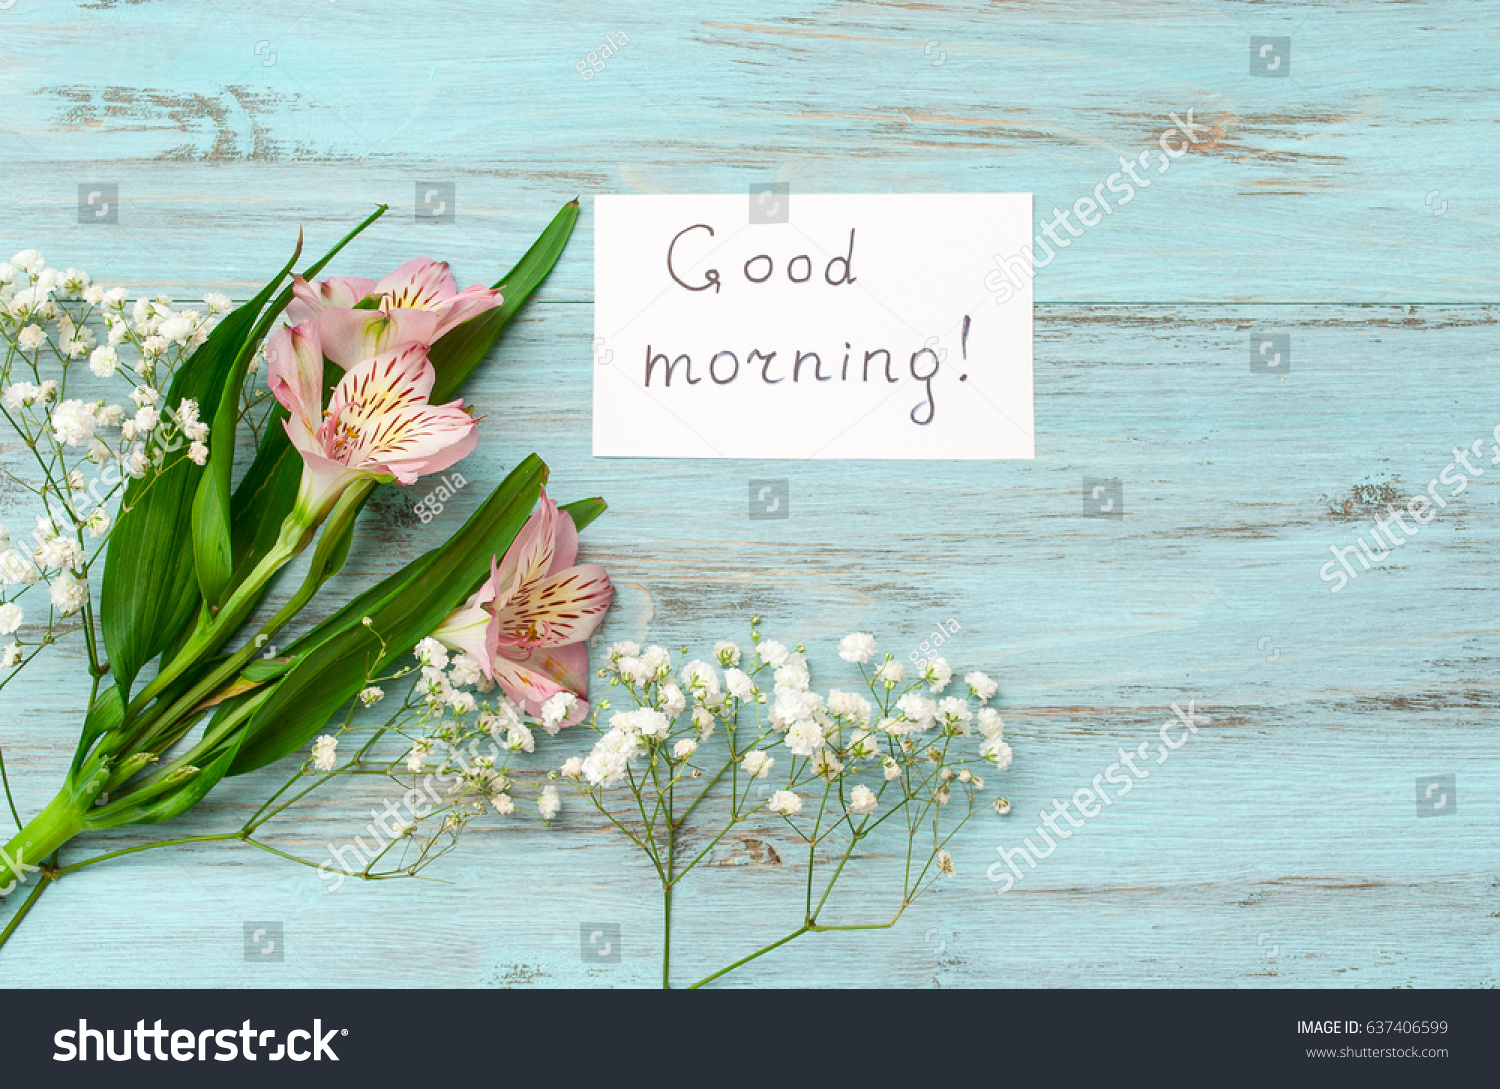 
Flowers and the inscription "Good Morning" on a wooden, turquoise background. The concept of happiness and joy. #637406599